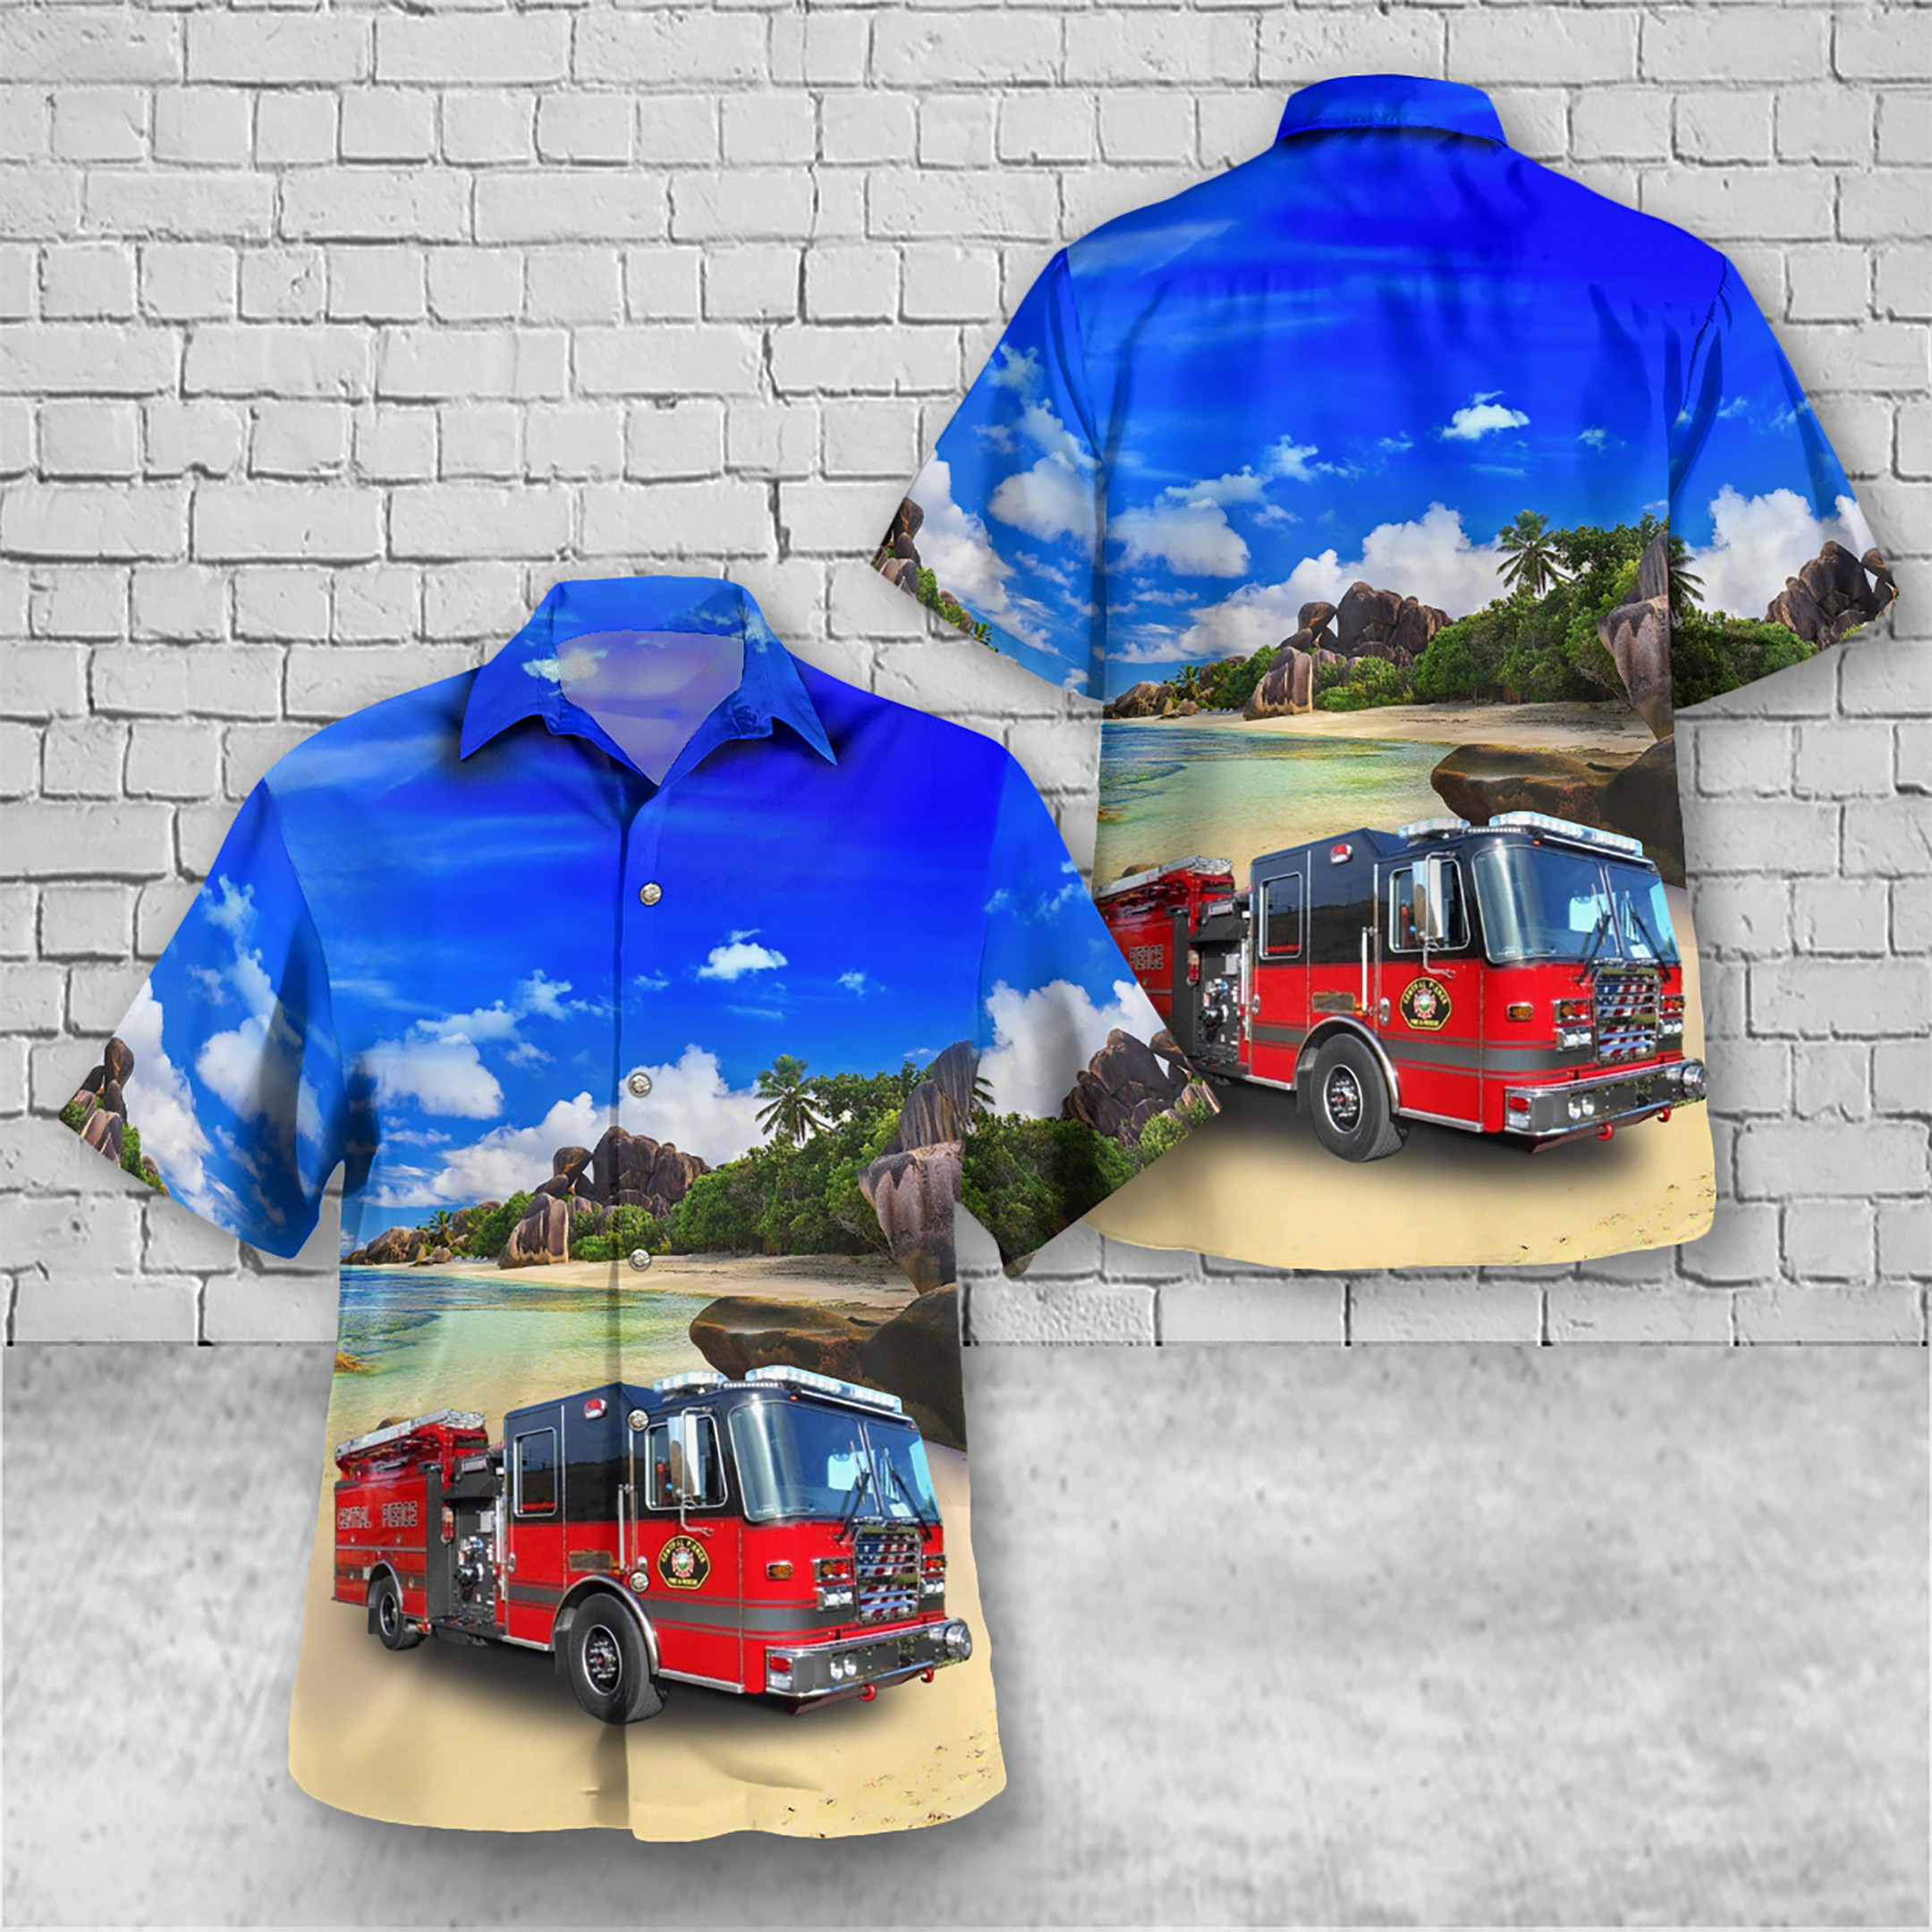 If you are in need of a new summertime look, pick up this Hawaiian shirt 21